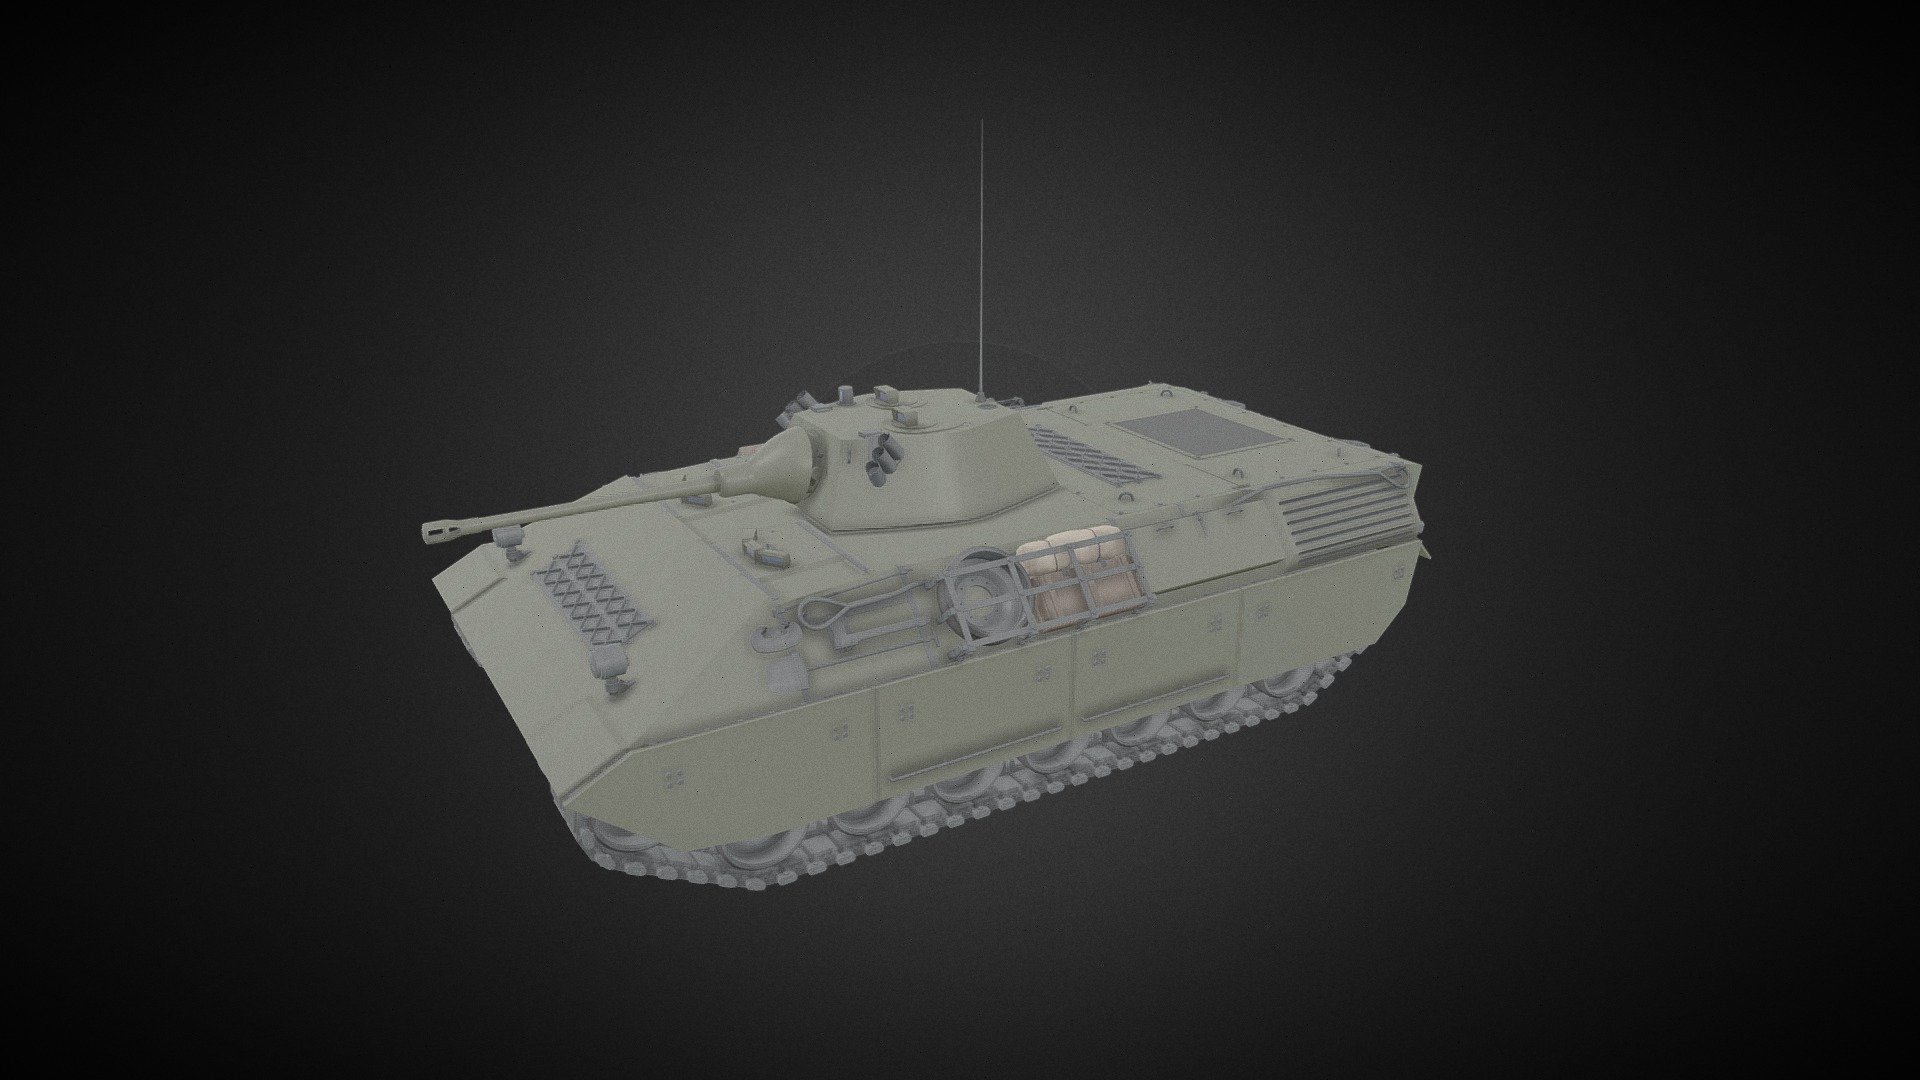 A version of my previous upload that's a bit smaller and has a Puma turret. And again, this is only the model. No textured renders yet. If I come around to making those renders they'll be available on my ArtStation: https://www.artstation.com/artwork/AlQ0Zy 3d model